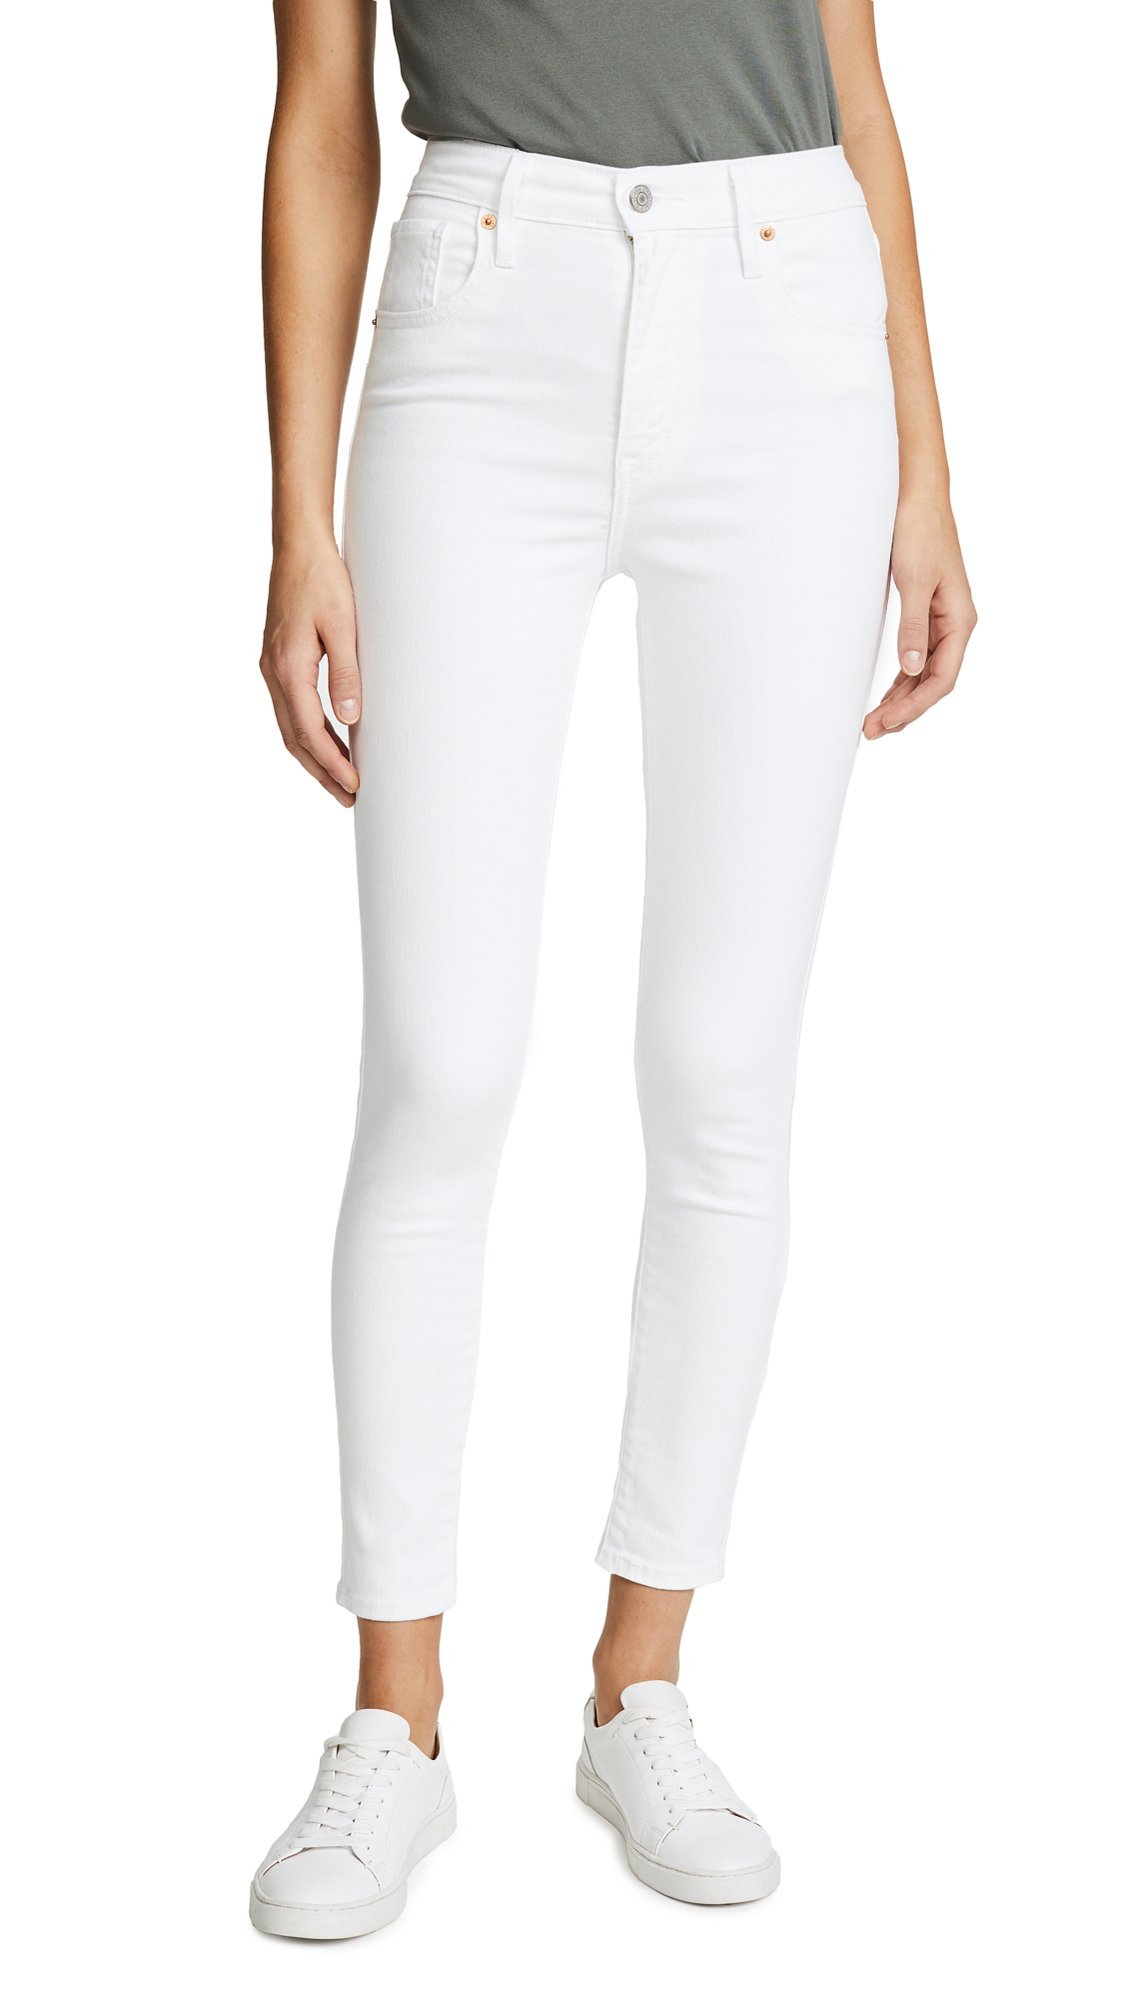 Book Cover Levi's Women's Mile High Ankle Super Skinny Jeans